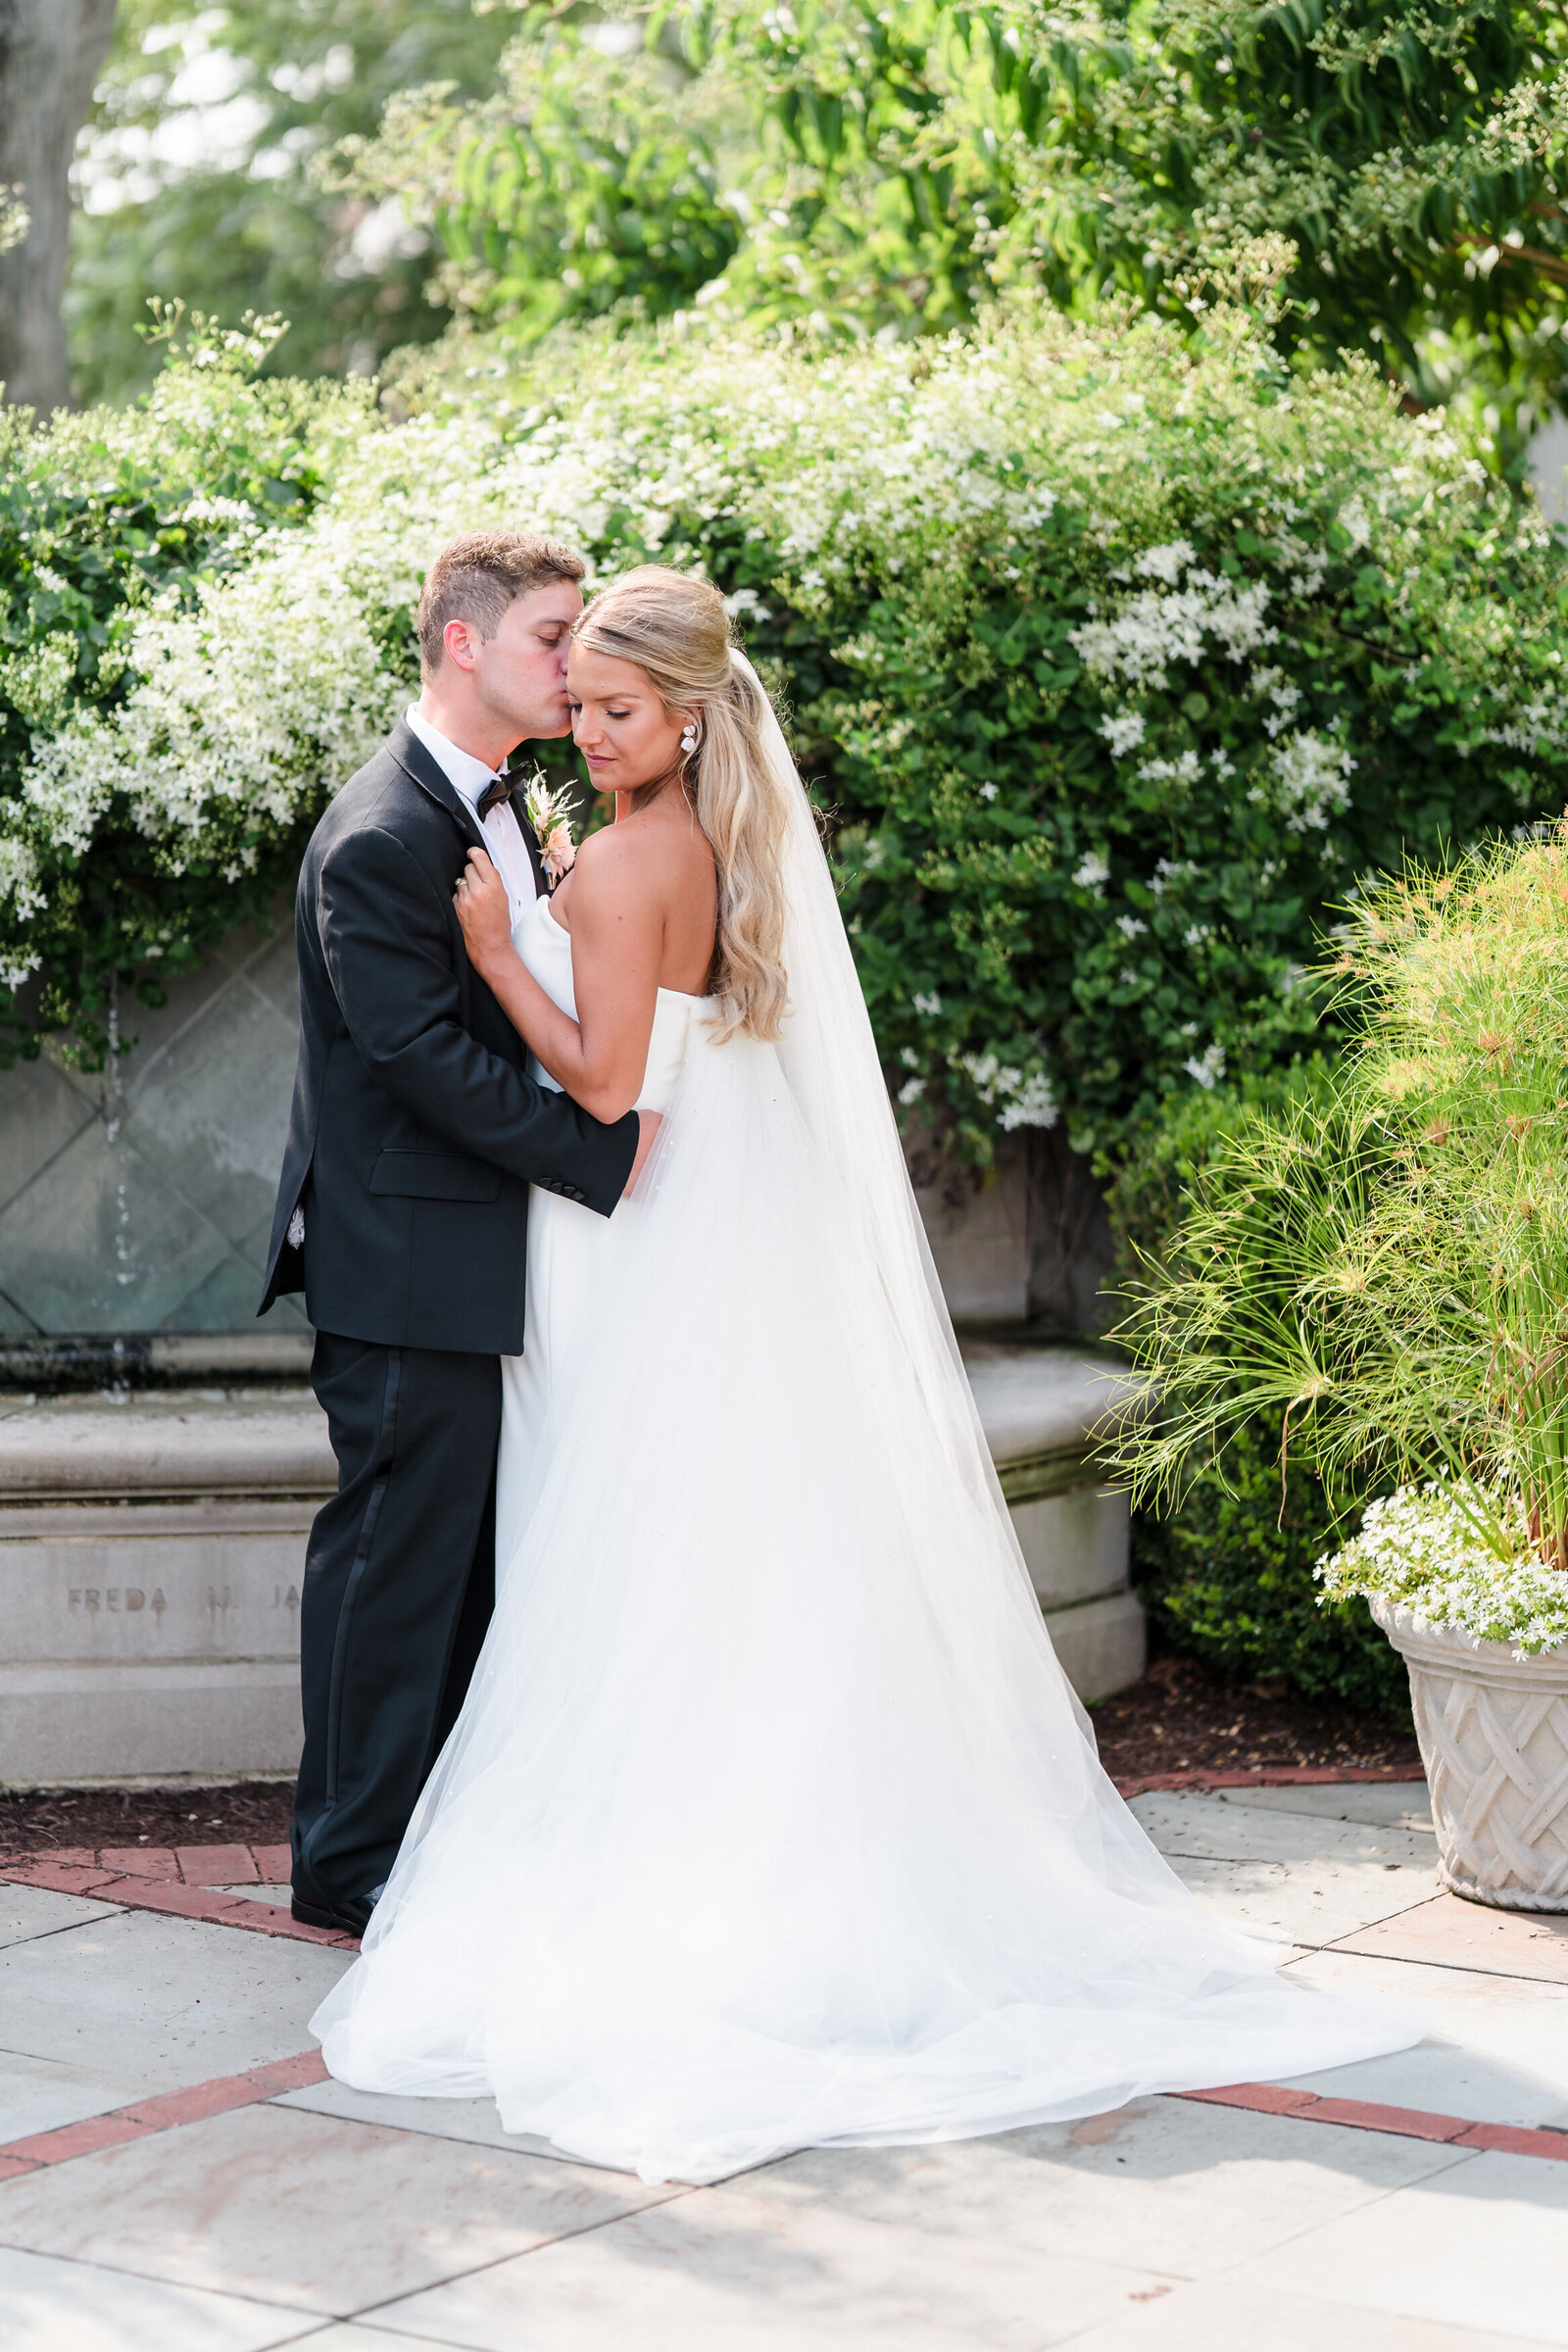 Groom kisses his wife's cheek in the gardens at the Franklin Park Conservatory